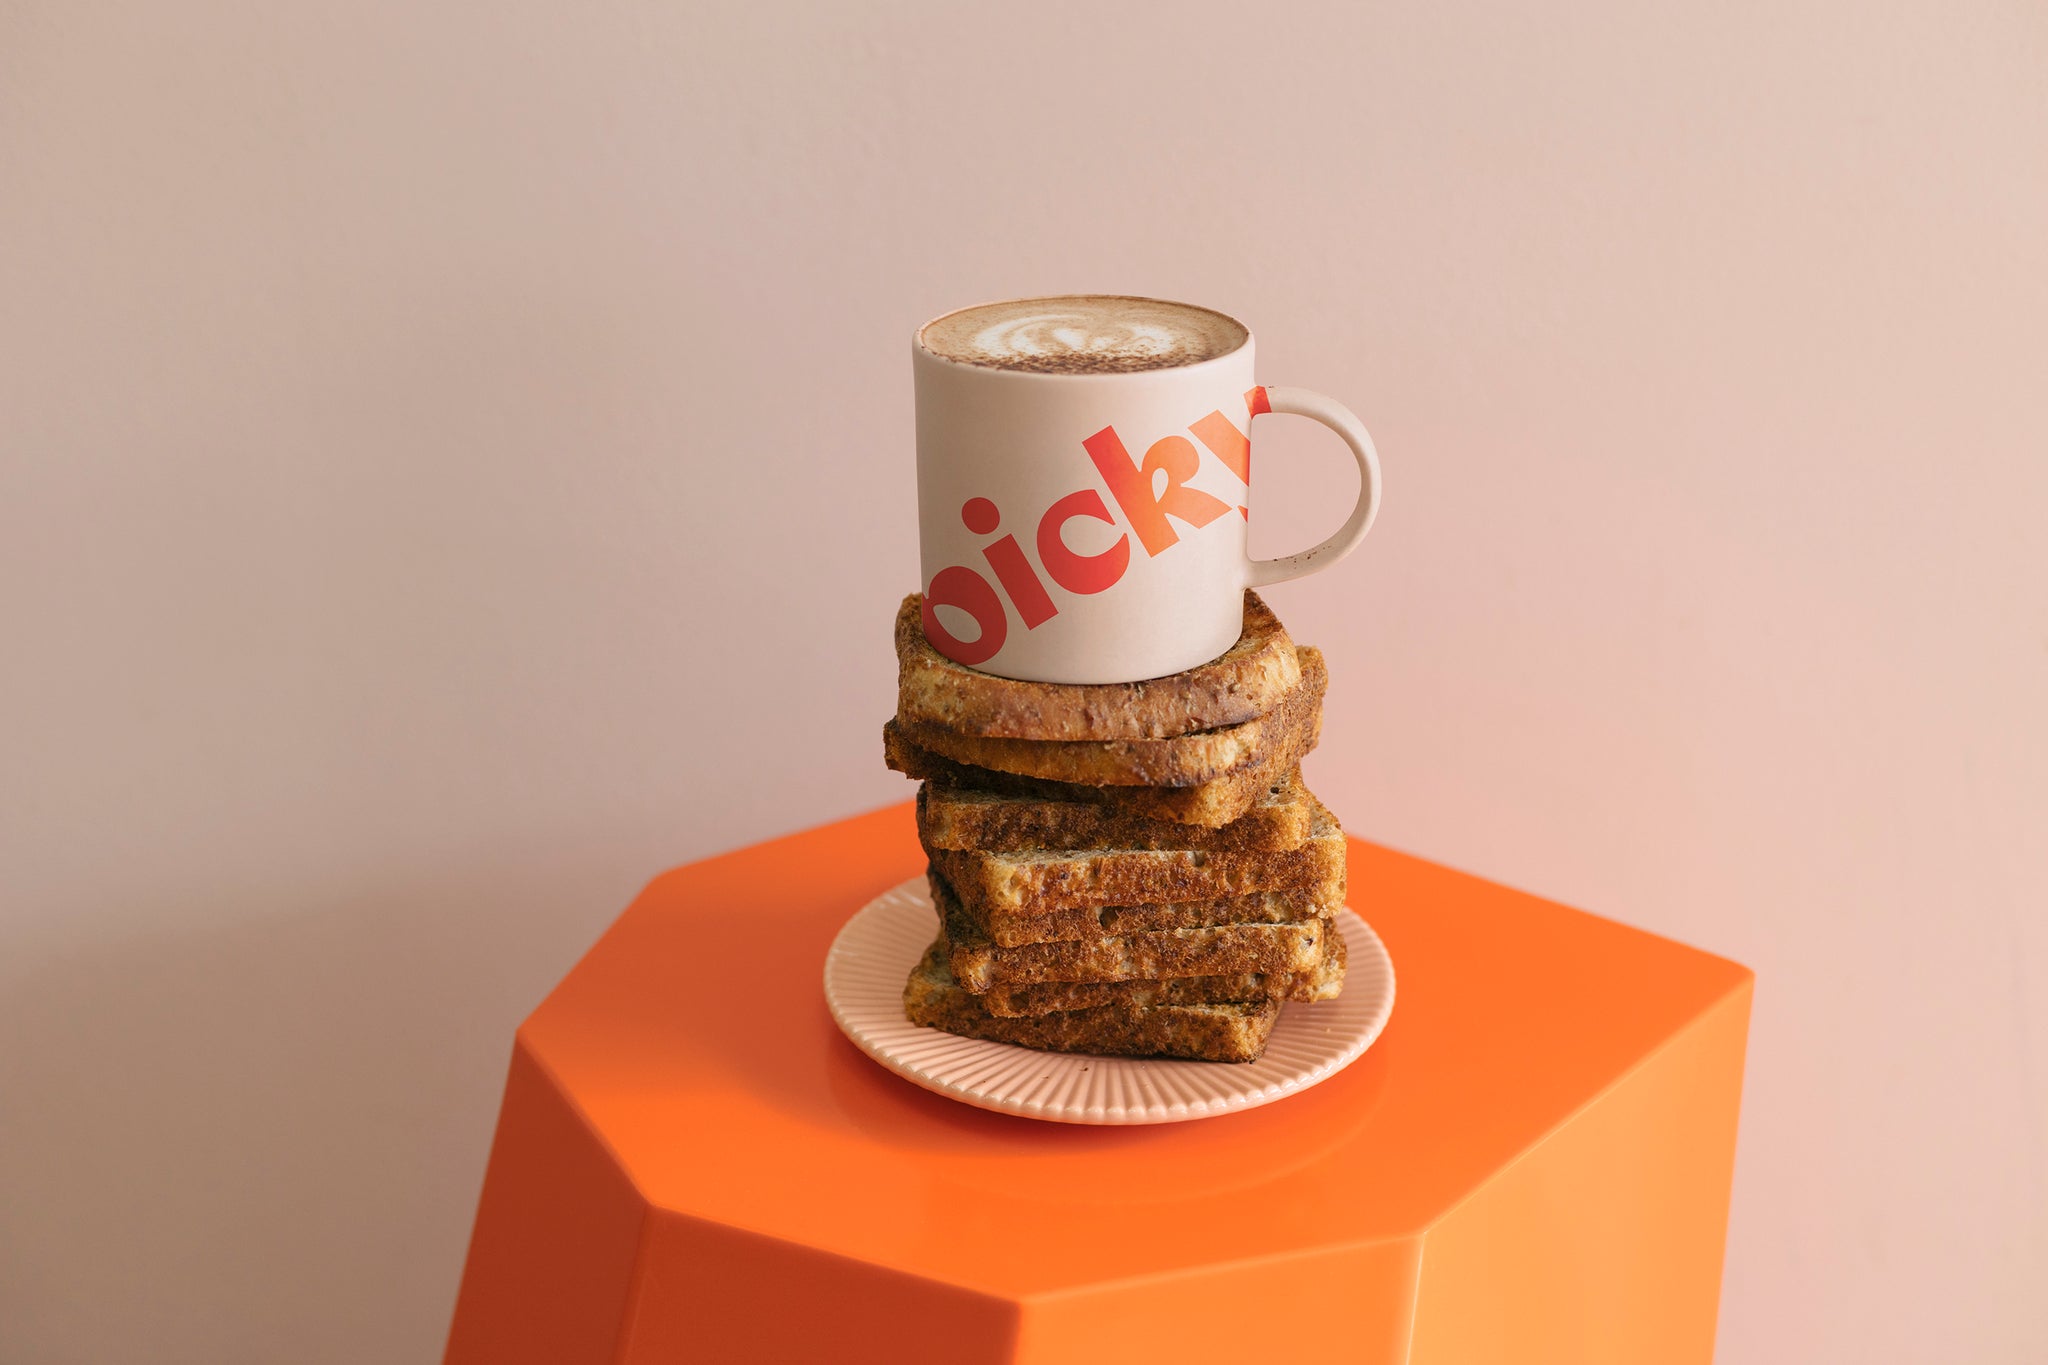 Landscape image of a orange hexagon shaped stool with a soft pink plate sitting in the middle. 12 pieces of wholemeal bread stacked on top, with a pink mug placed on top. The words Picky displayed largely on an angle moving up the mug in a red colour. 